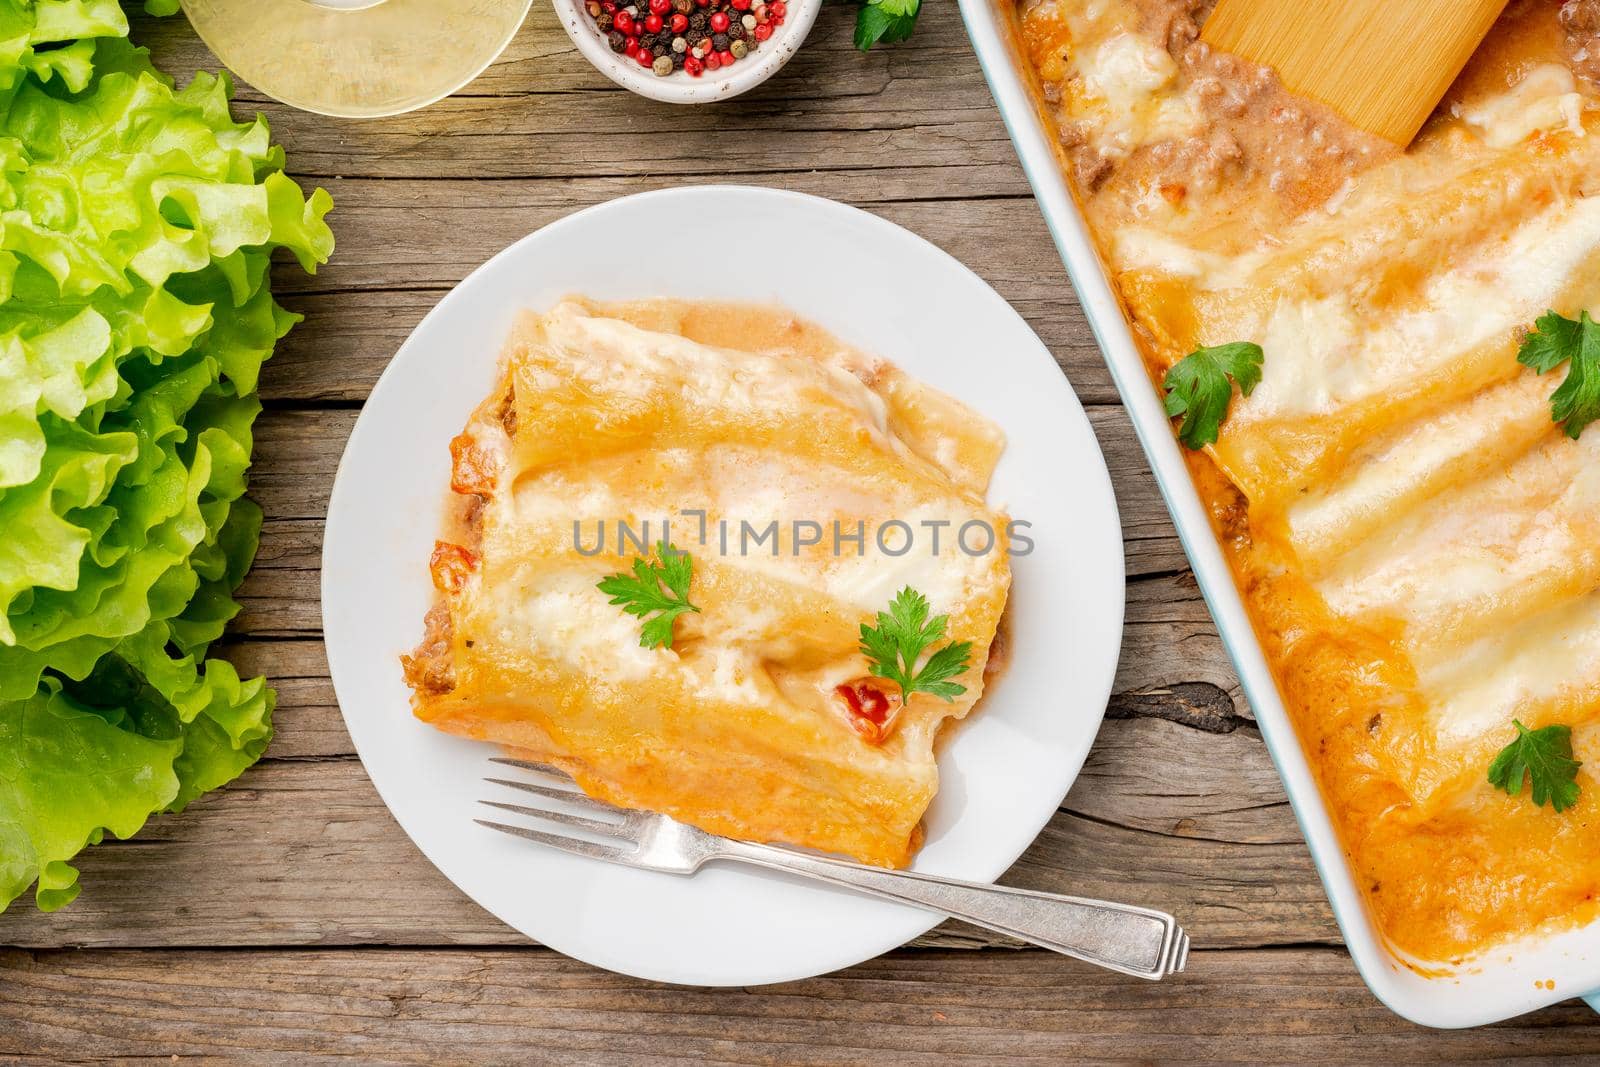 Cannelloni with filling of ground beef, tomatoes, by NataBene